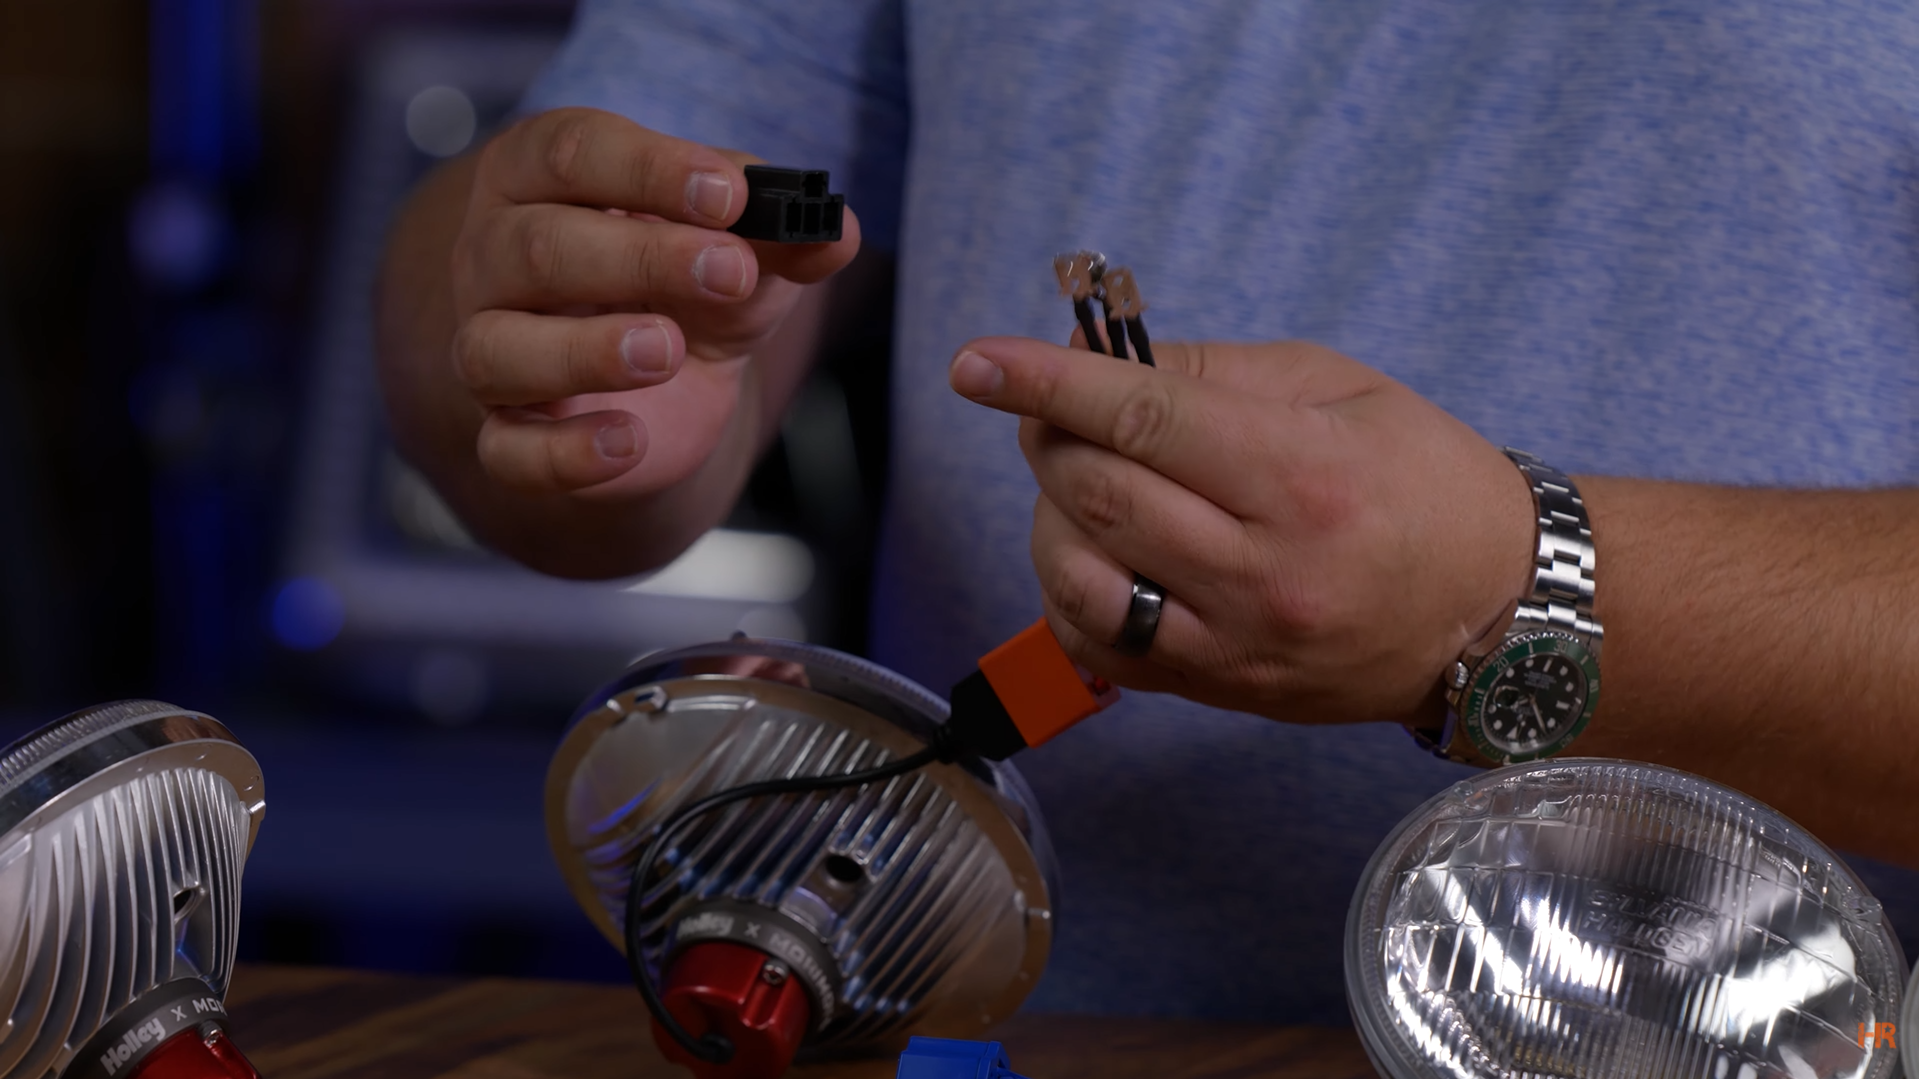 A man holds the factory adapter and the relay used to connect the RetroBright Headlights to the car.